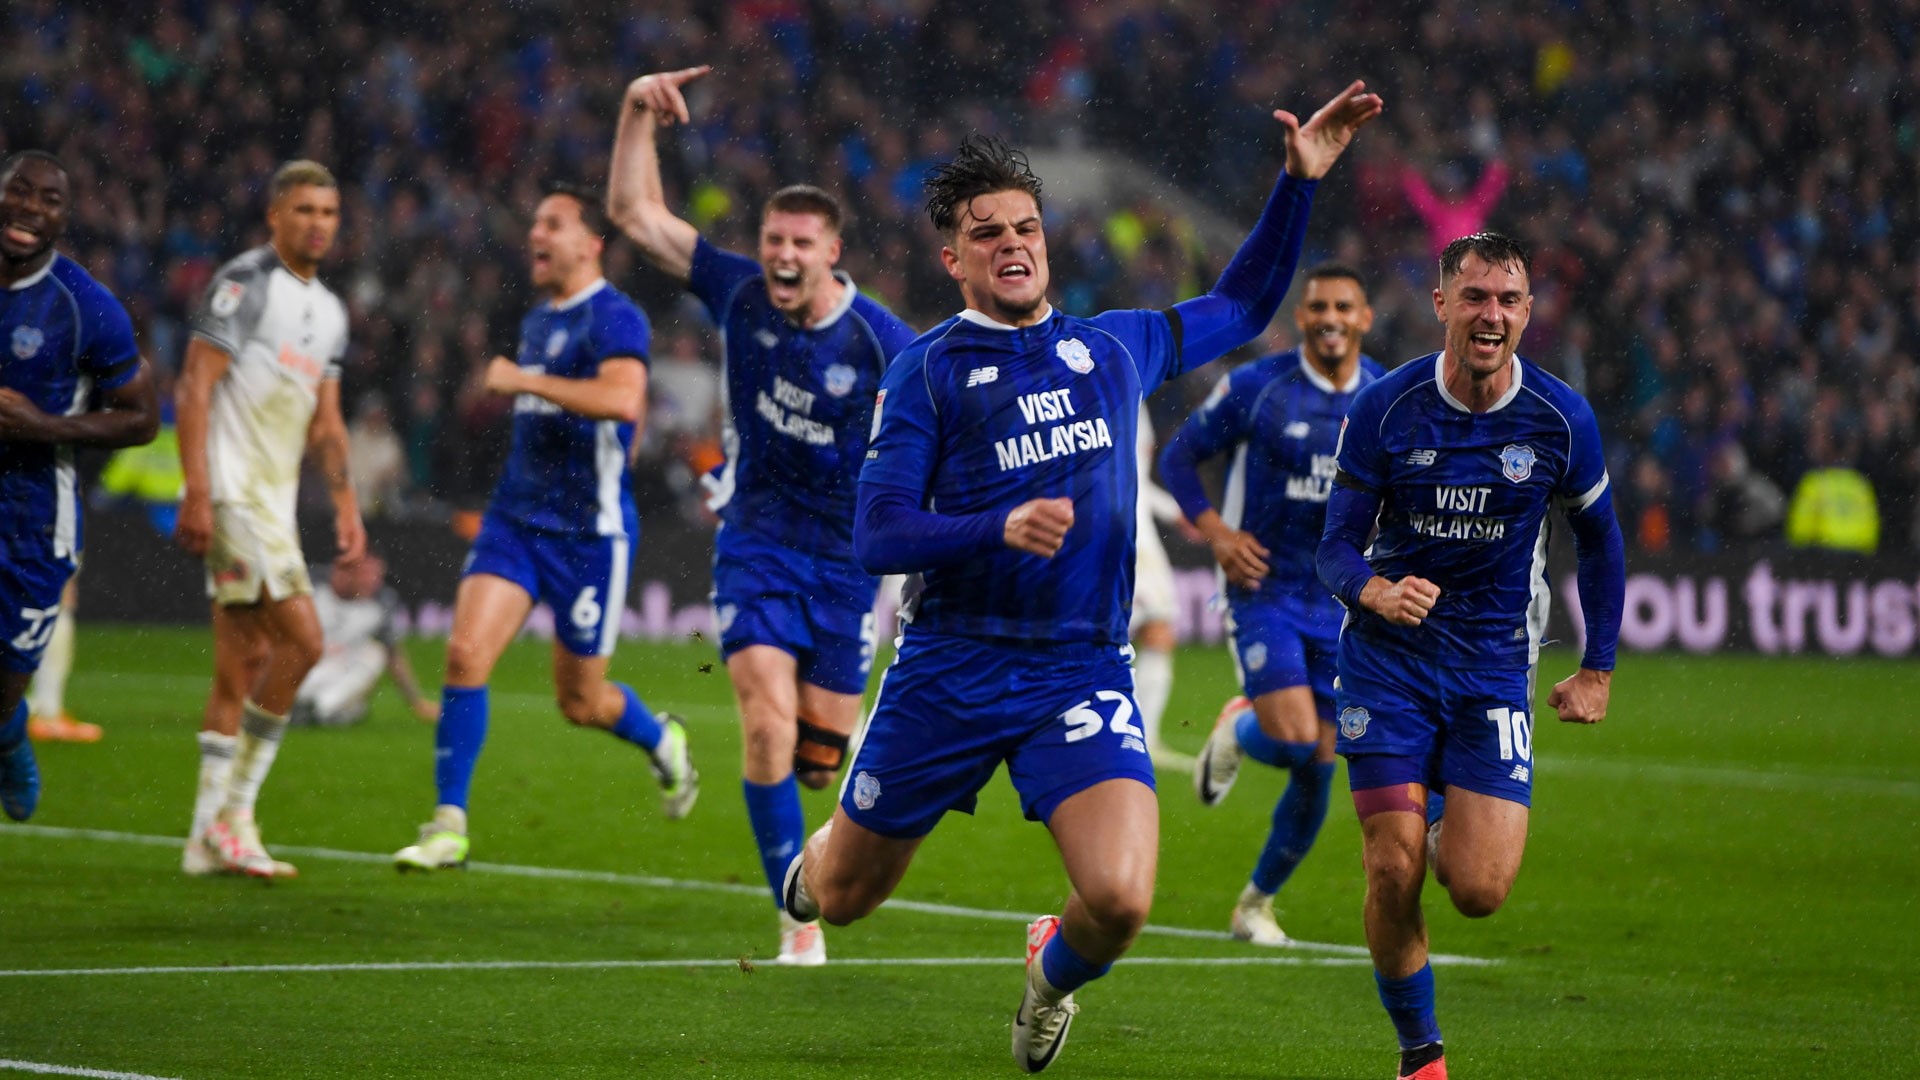 After so many worth forgetting, Cardiff finally have a week to remember